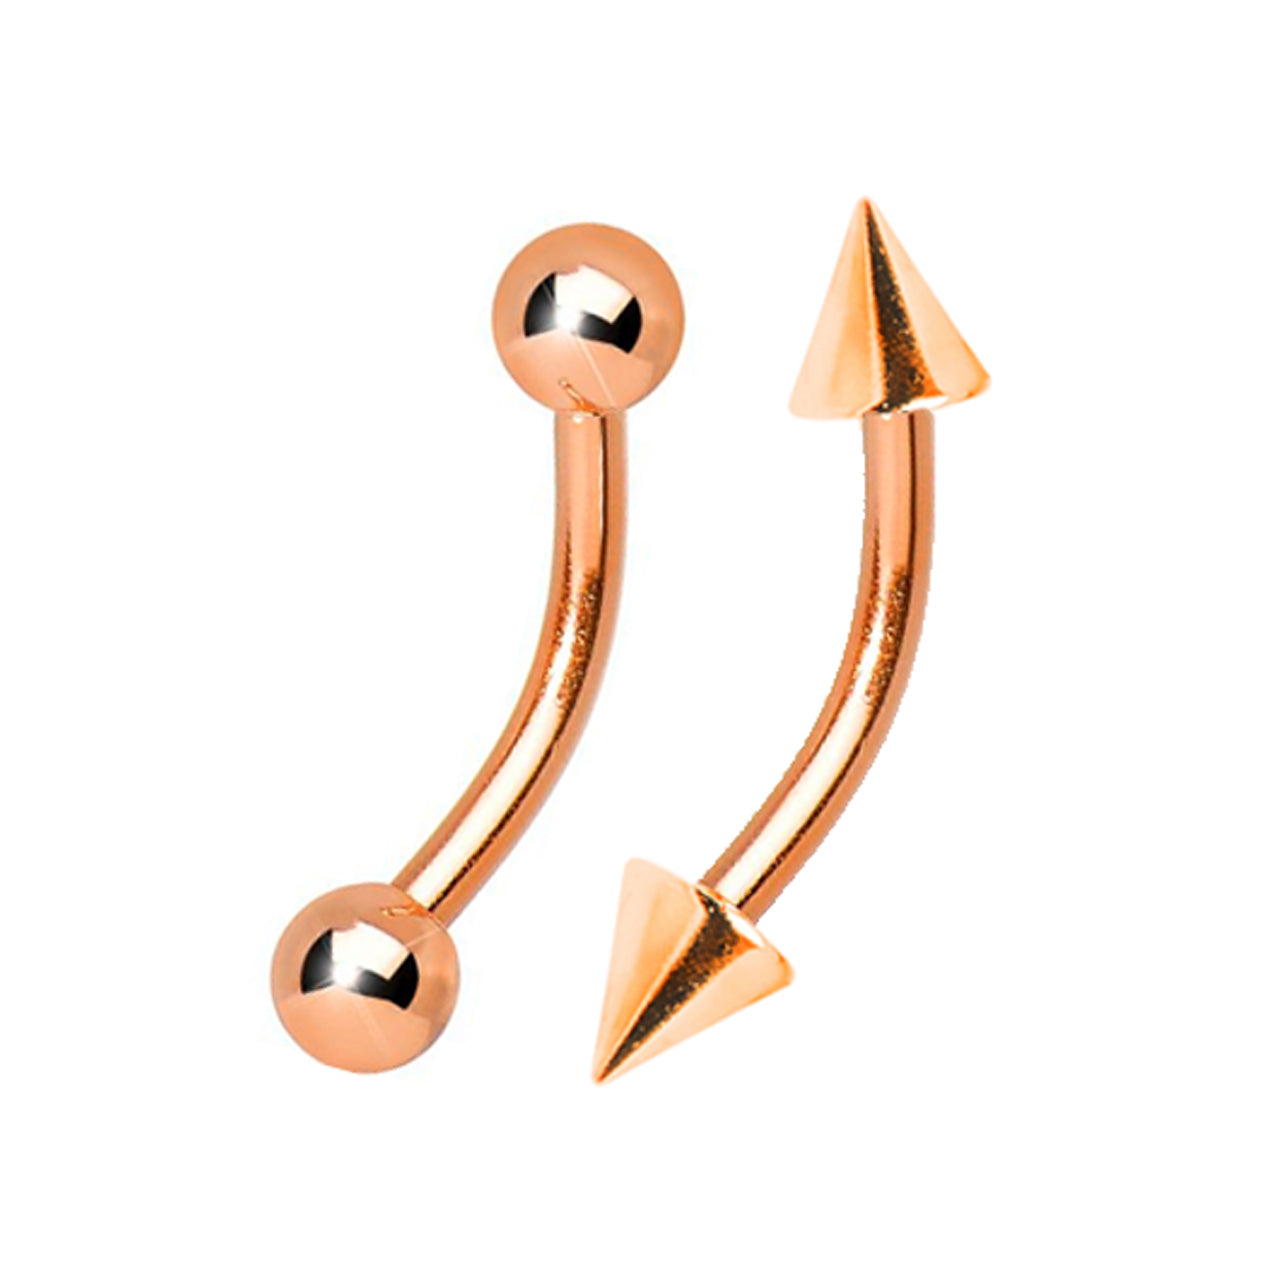 Surgical Steel Rose Gold Eyebrow Ring Curved Barbell 16 Gauge - 2 Pack